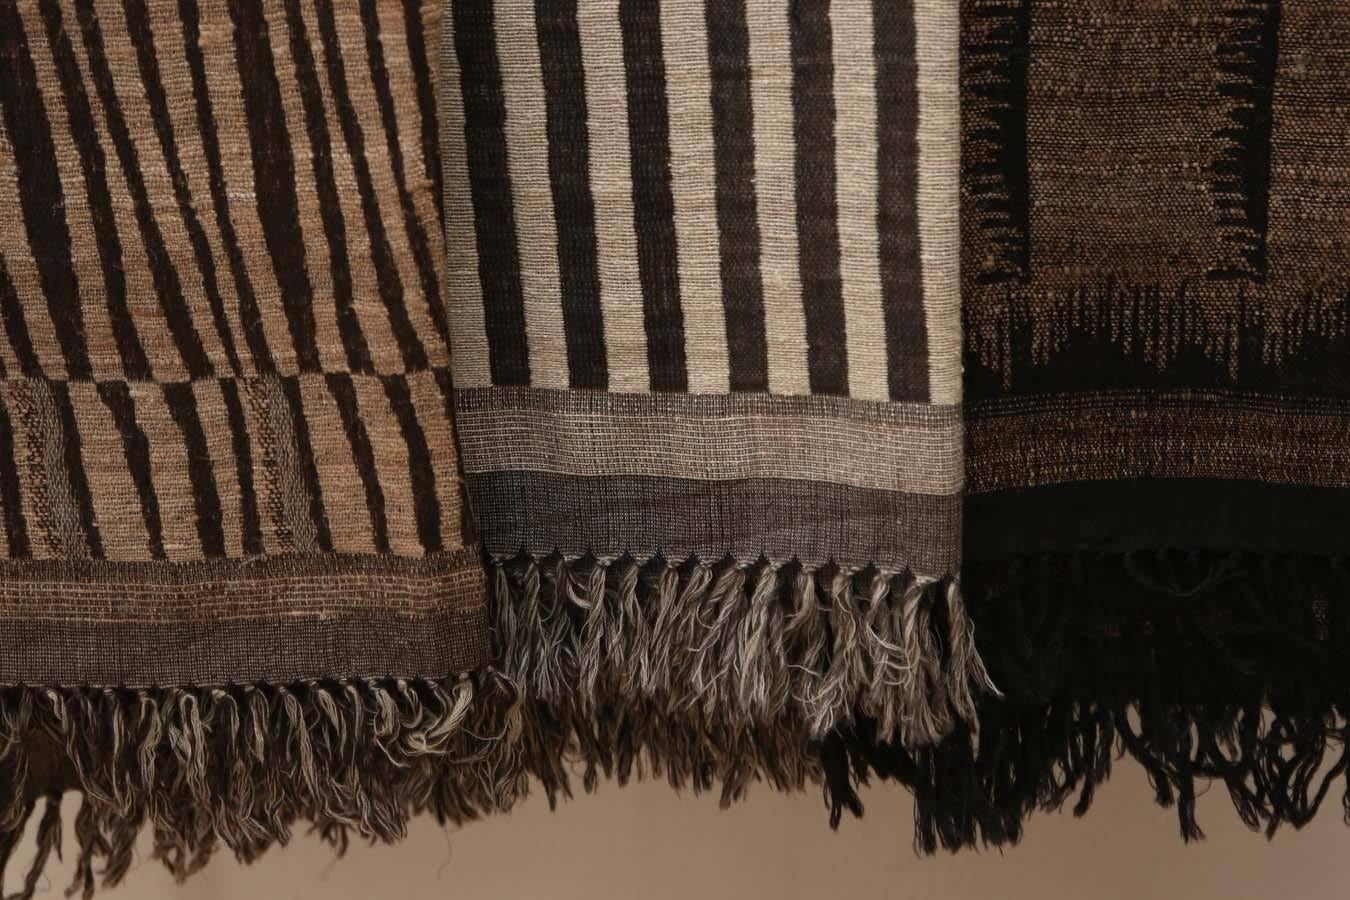 Contemporary Indian Hand Woven Throws.  Browns, Blacks, Grays and White.  Wool and Raw Silk.  For Sale